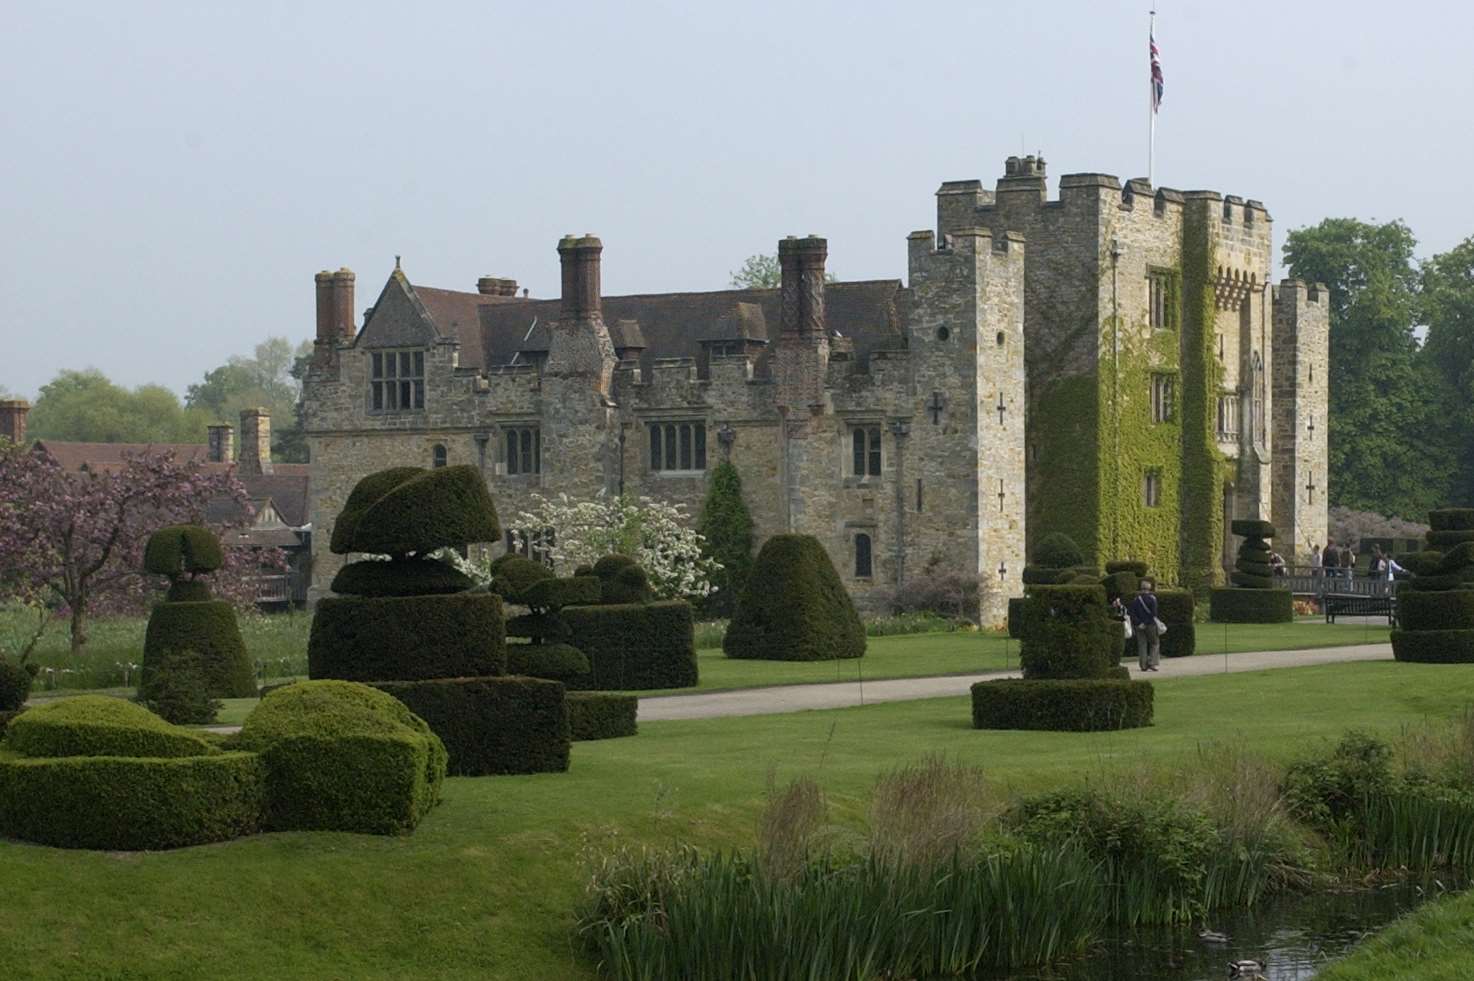 Historic Hever Castle was once home to Anne Boleyn